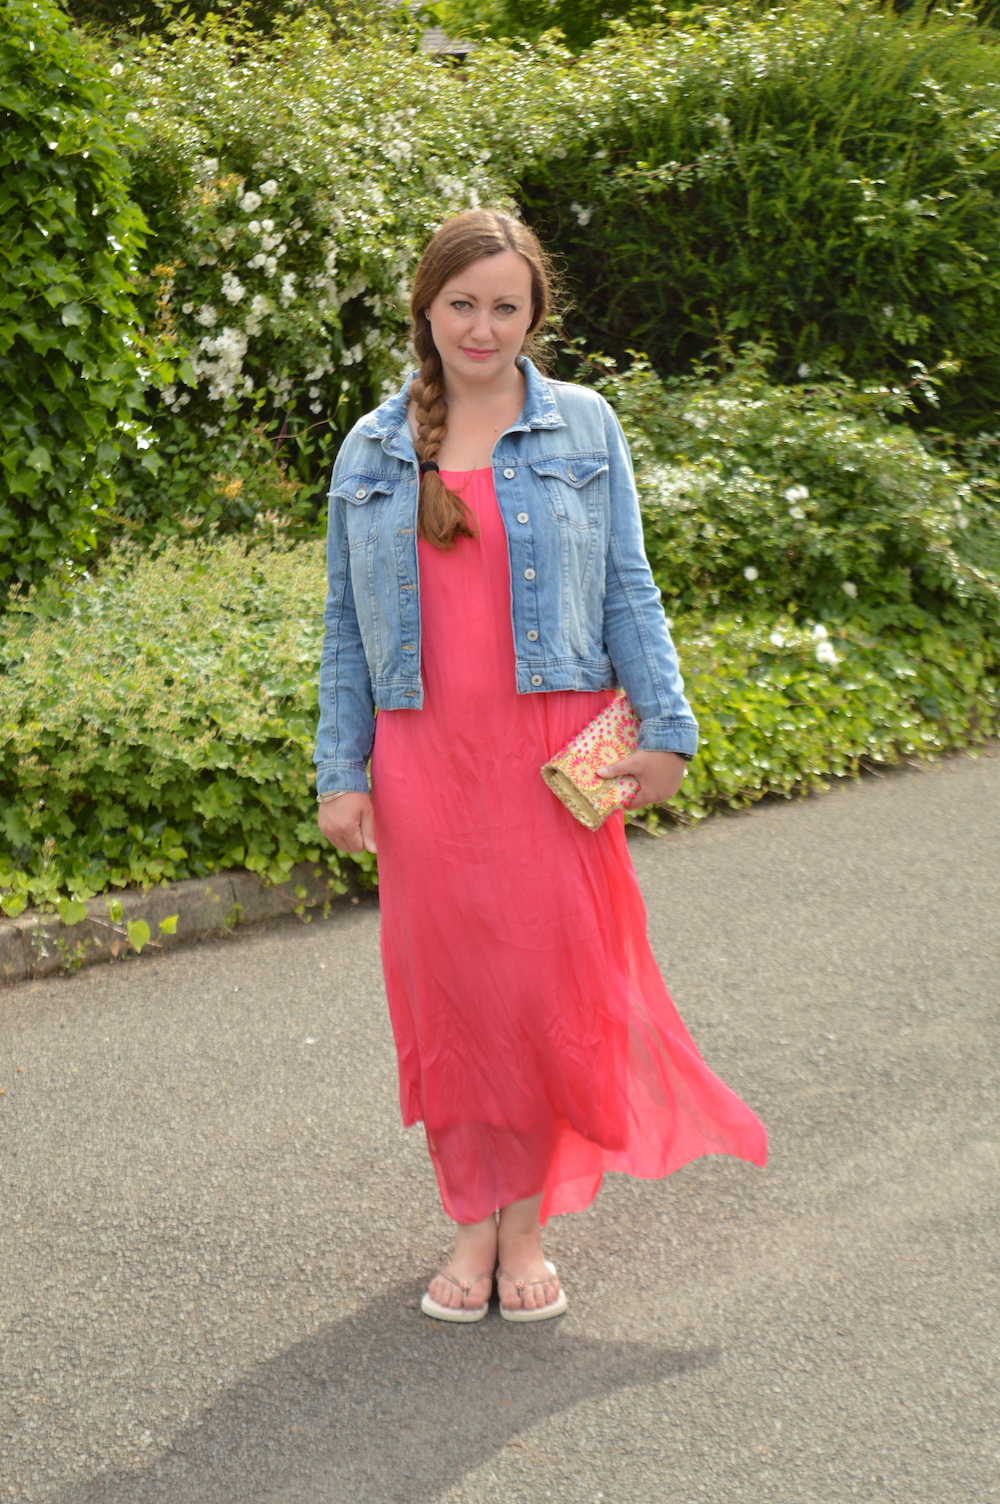 Bright pink maxi dress outfit